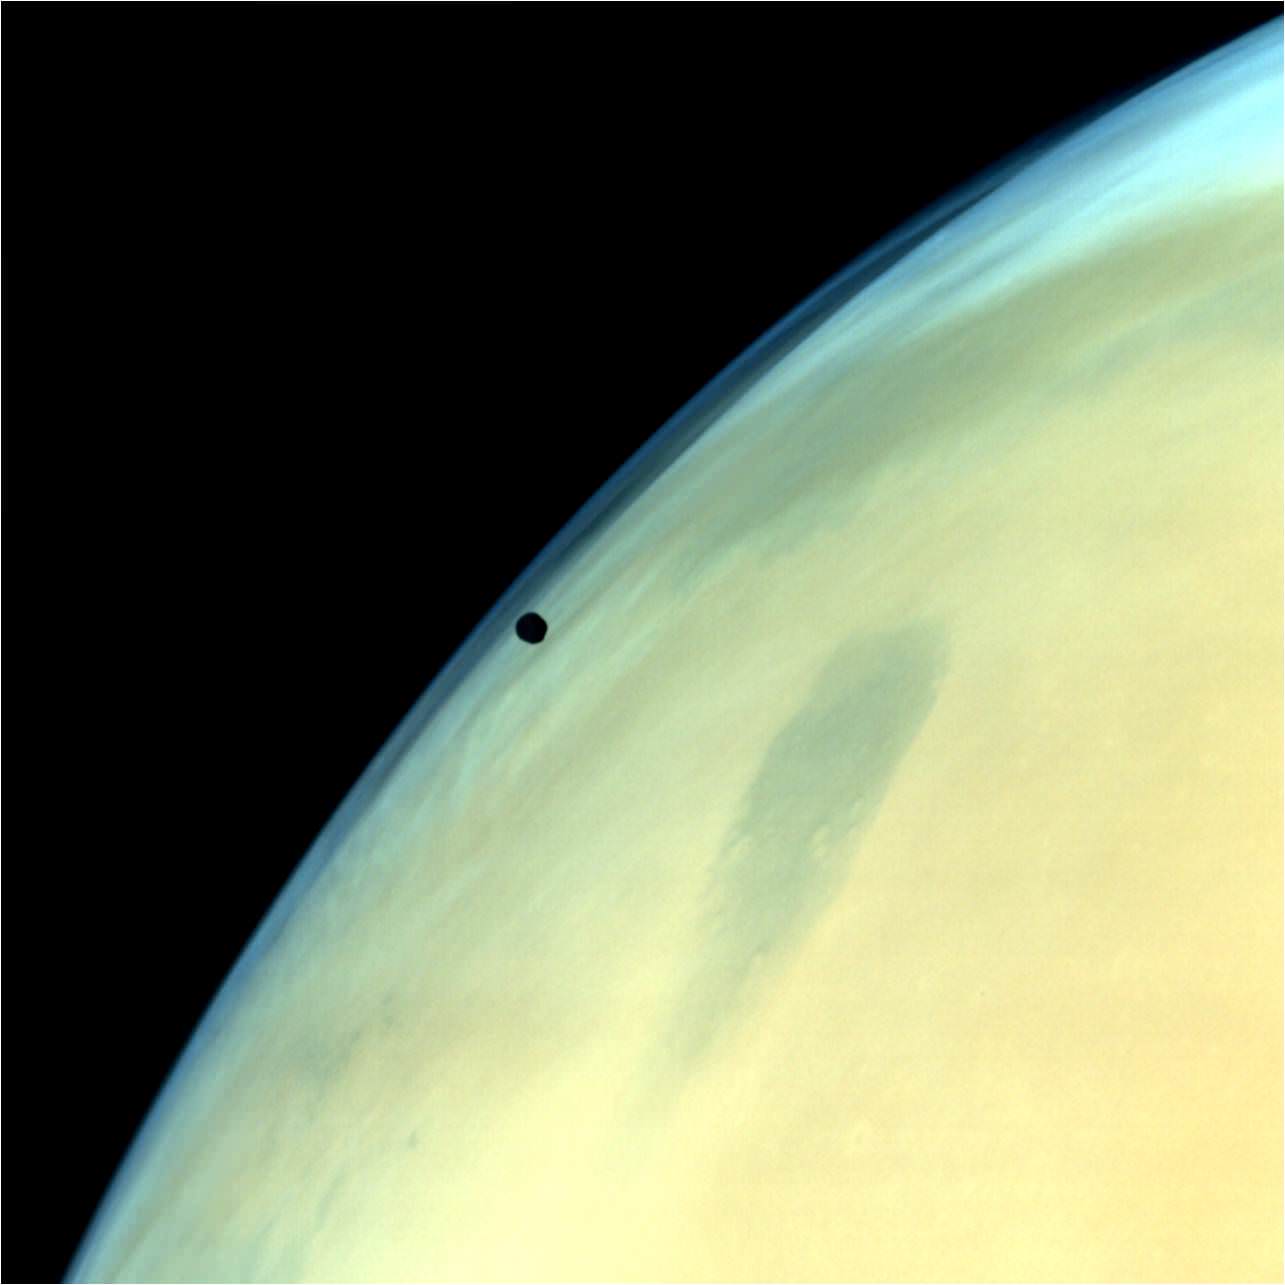 Phobos, one of the two natural satellites of Mars silhouetted against the Martian surface.  Credit: ISRO